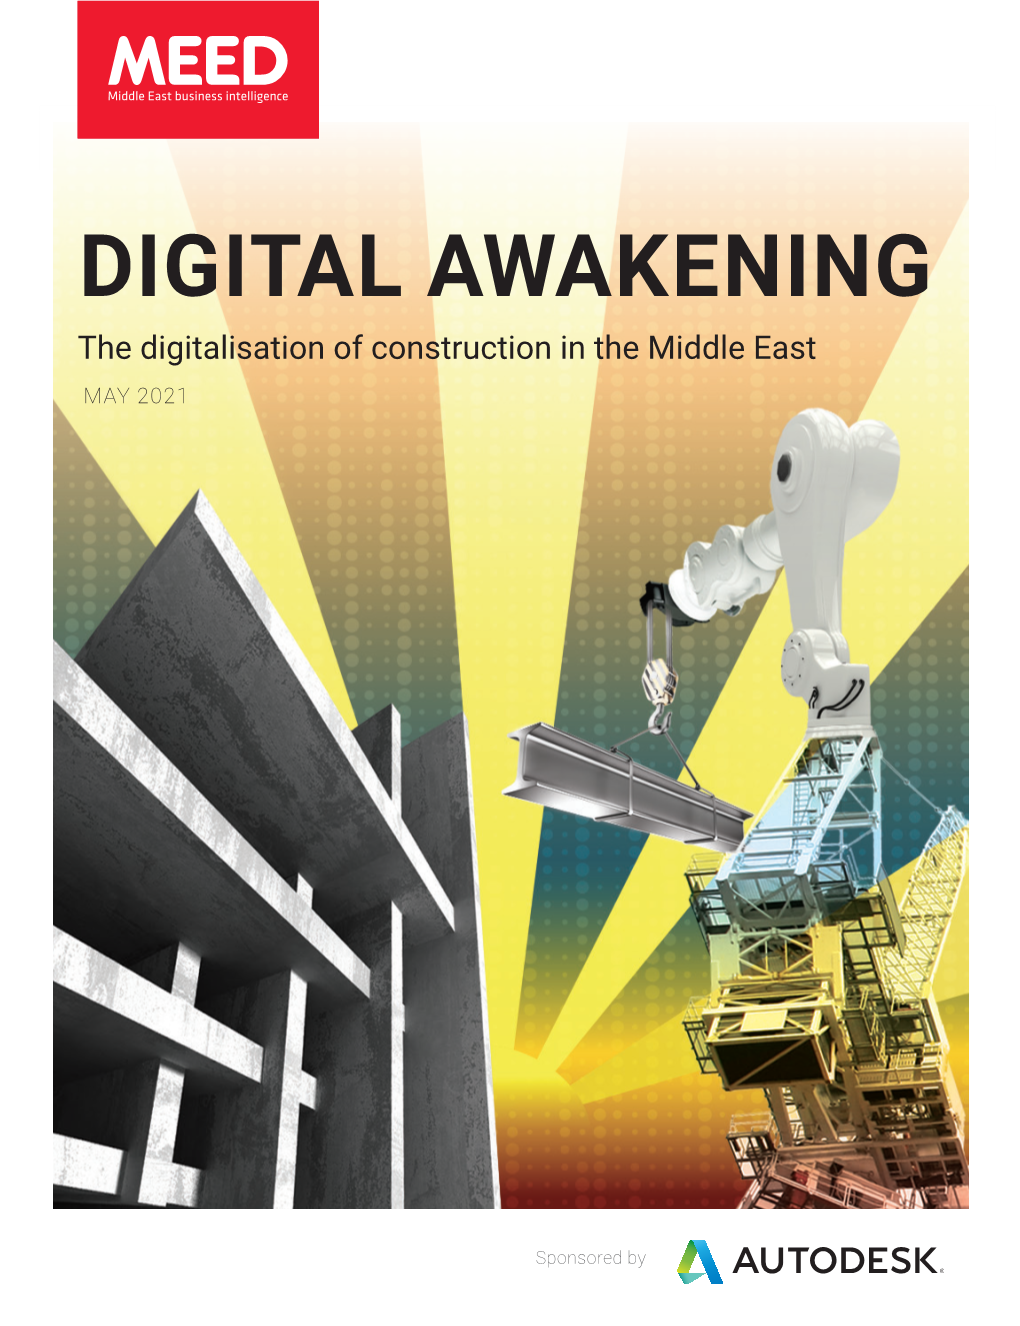 The Digitalization of Construction in the Middle East